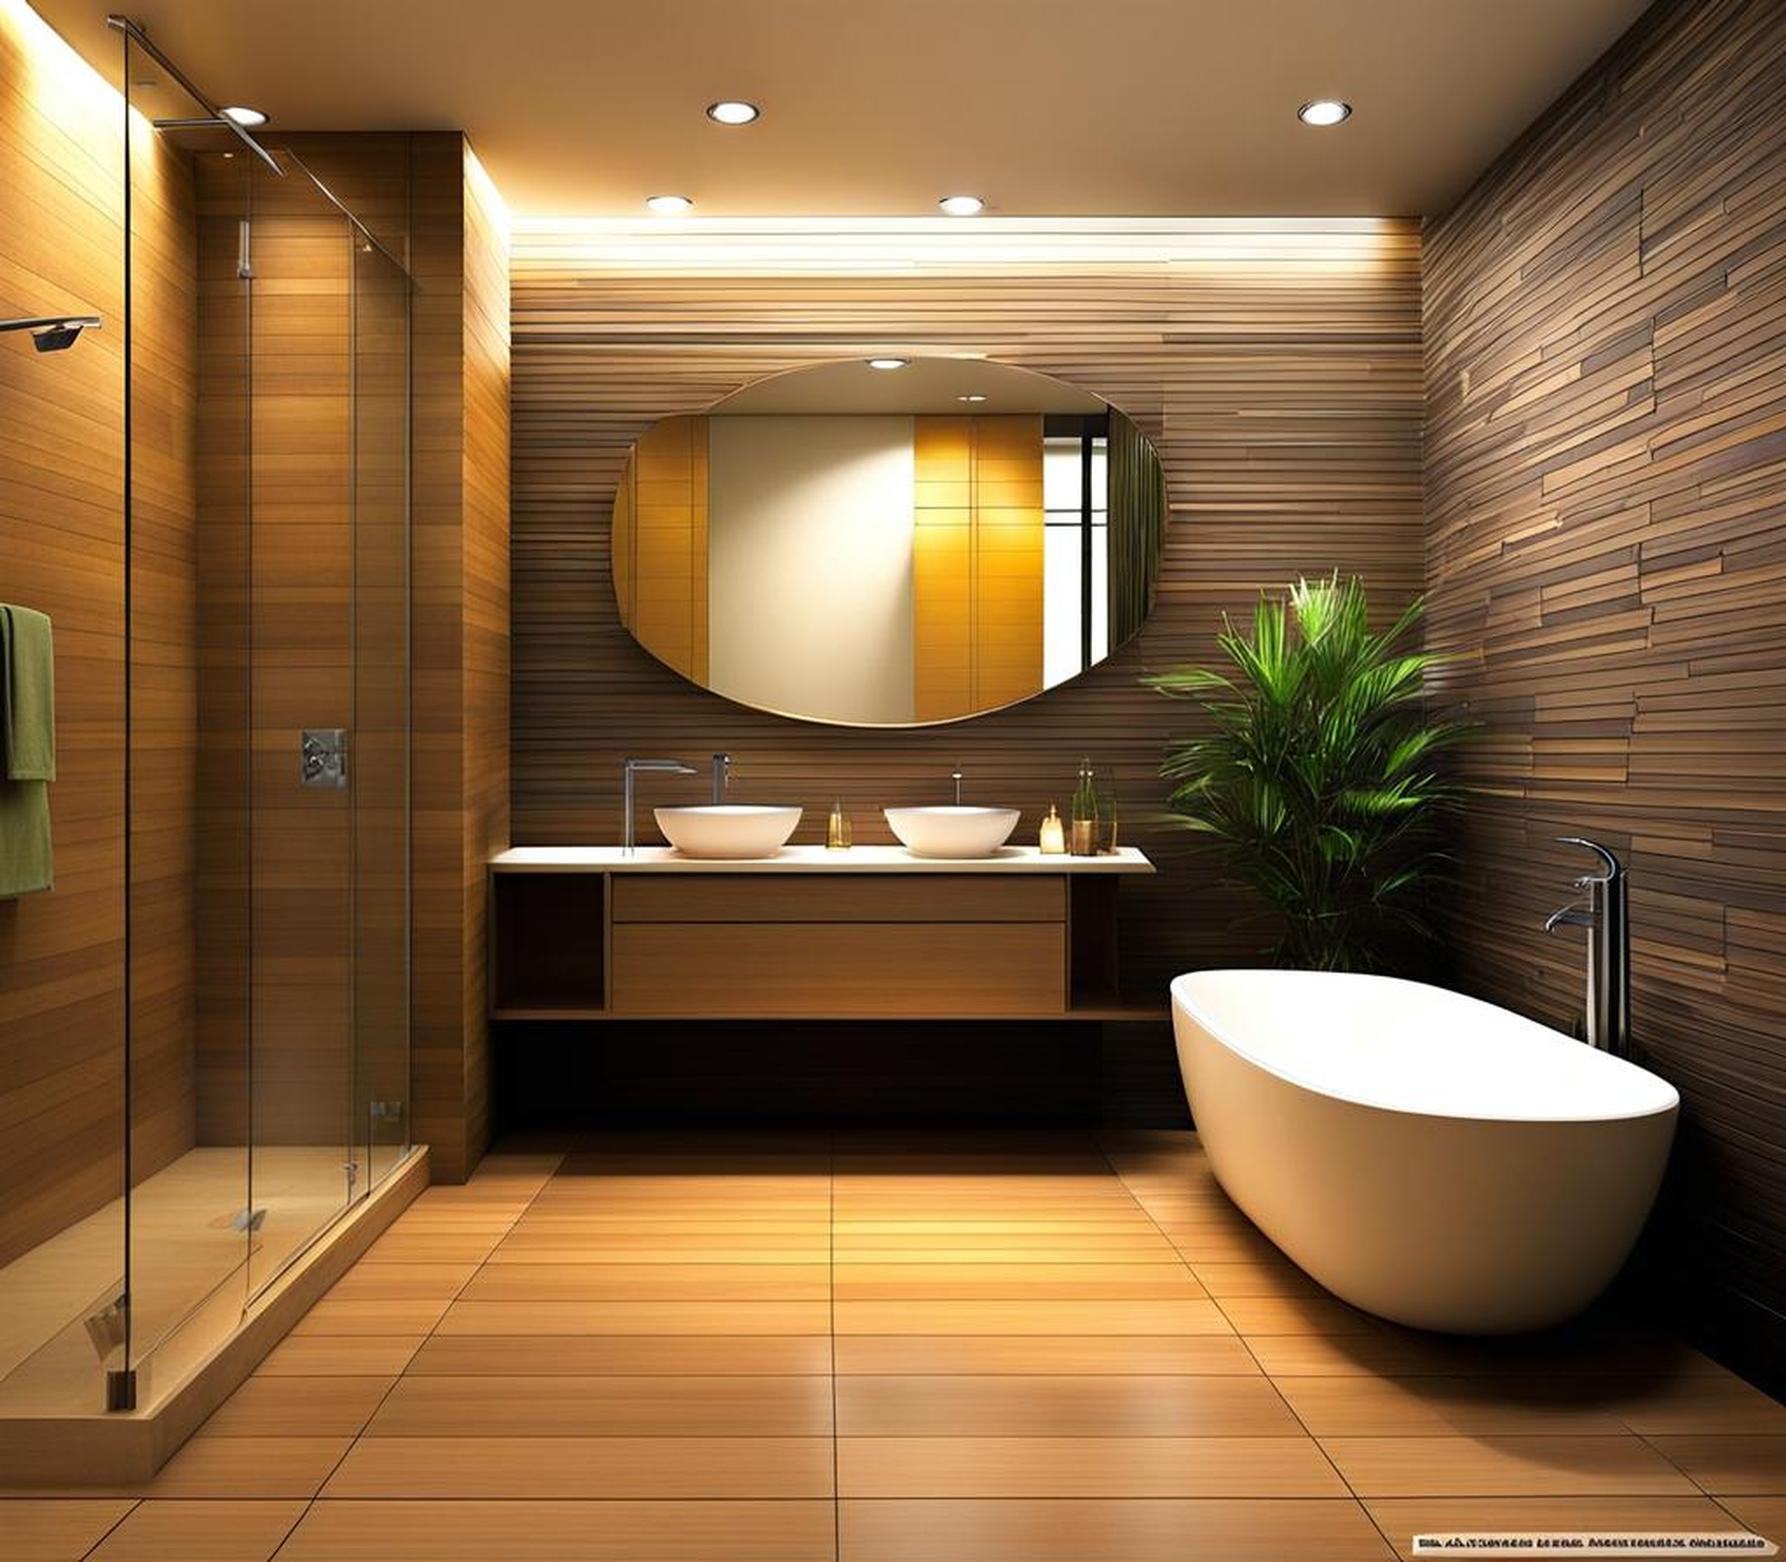 Reinvent Your Bathroom Walls On A Budget – No Tiles Needed